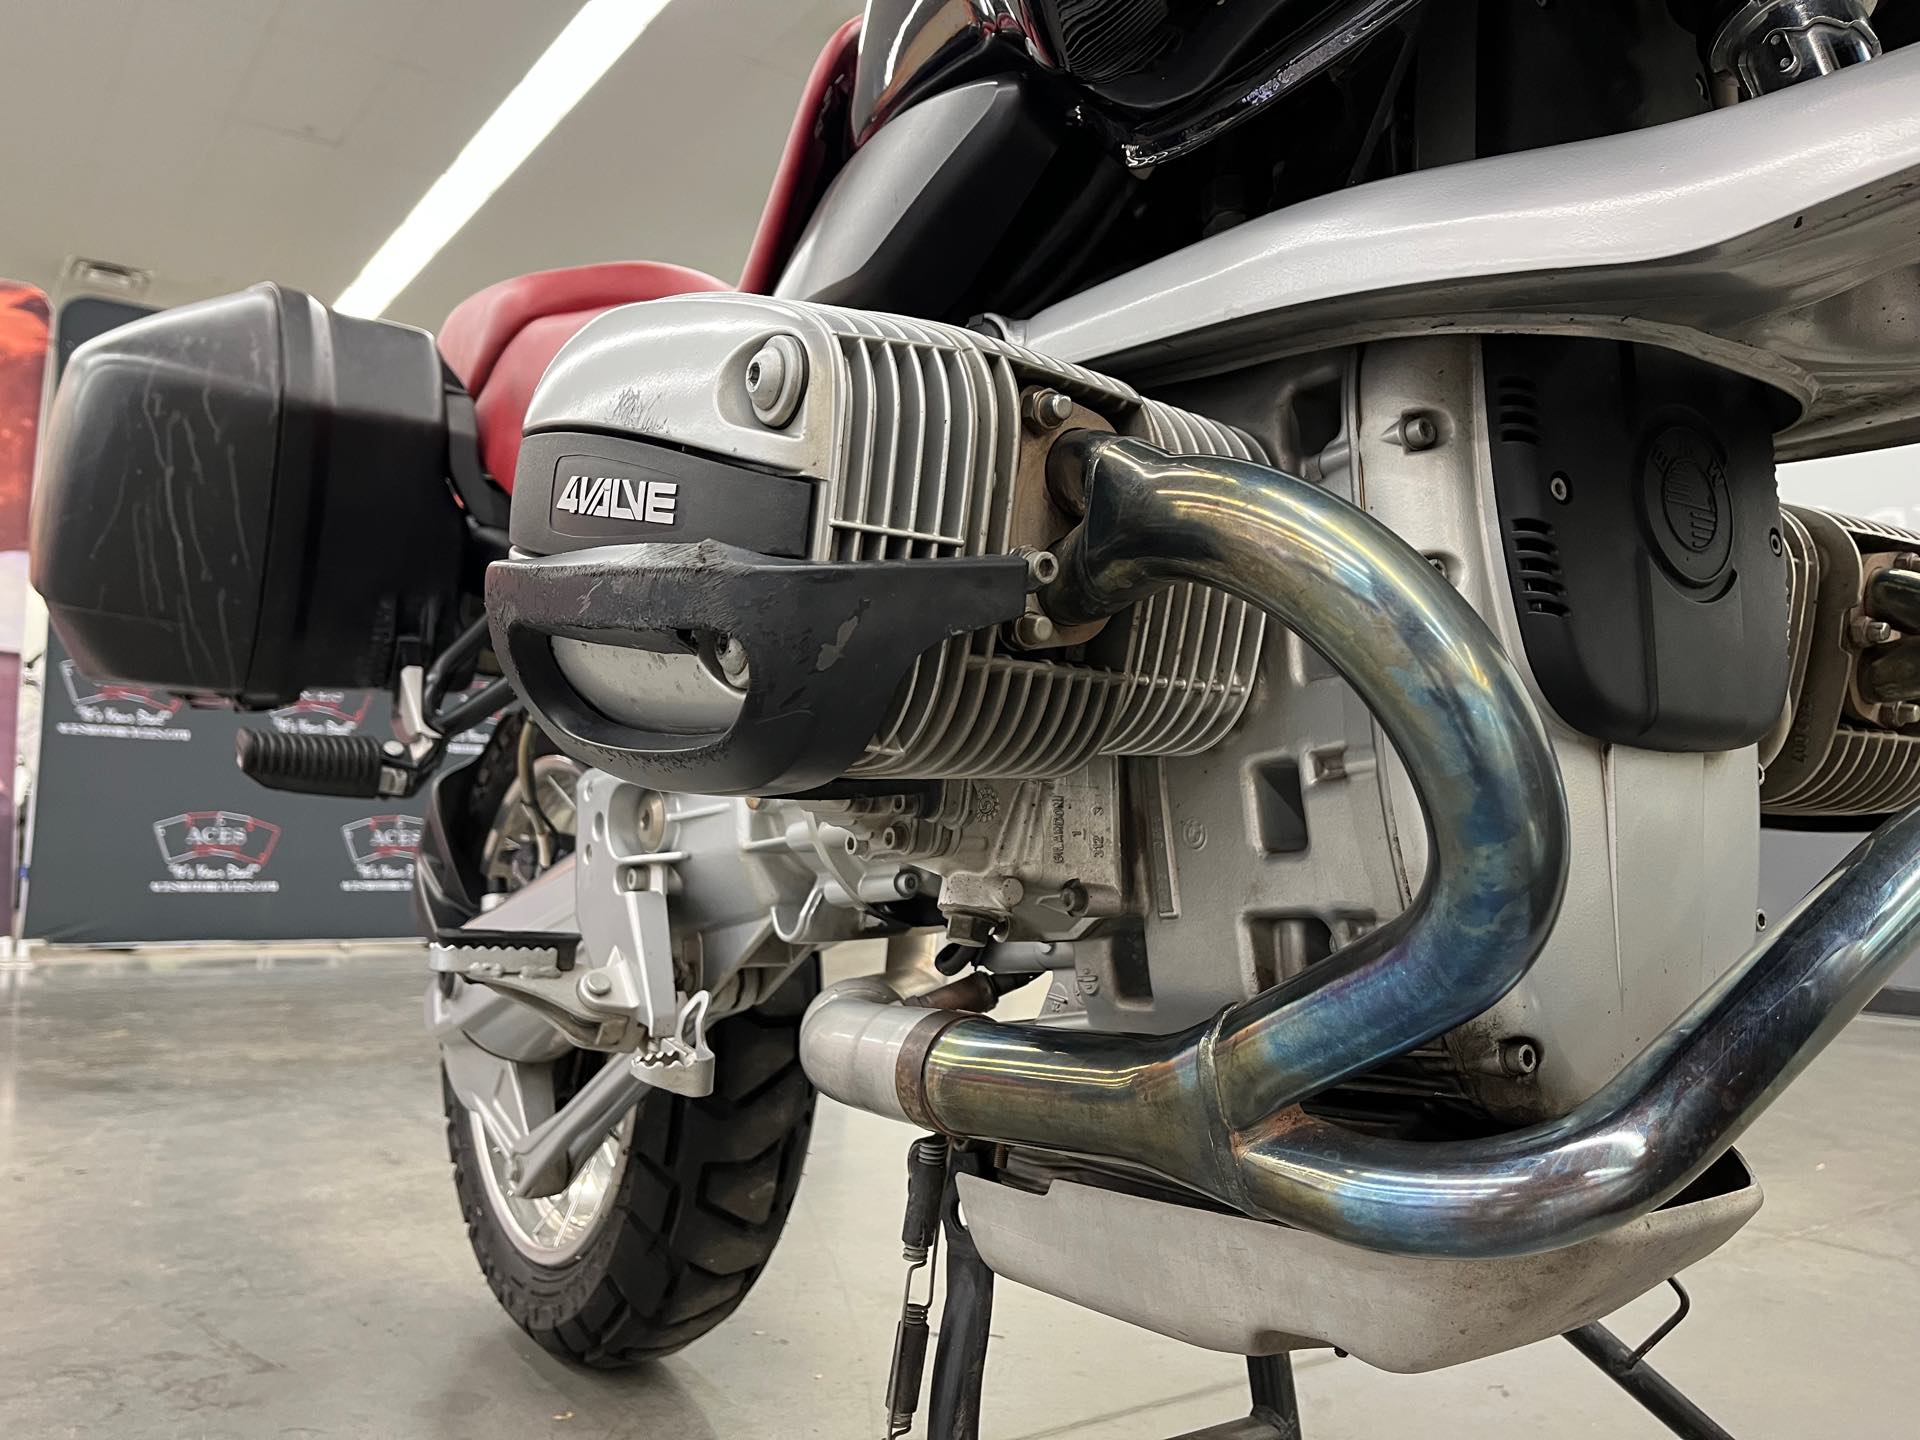 1996 BMW R1100GS at Aces Motorcycles - Denver